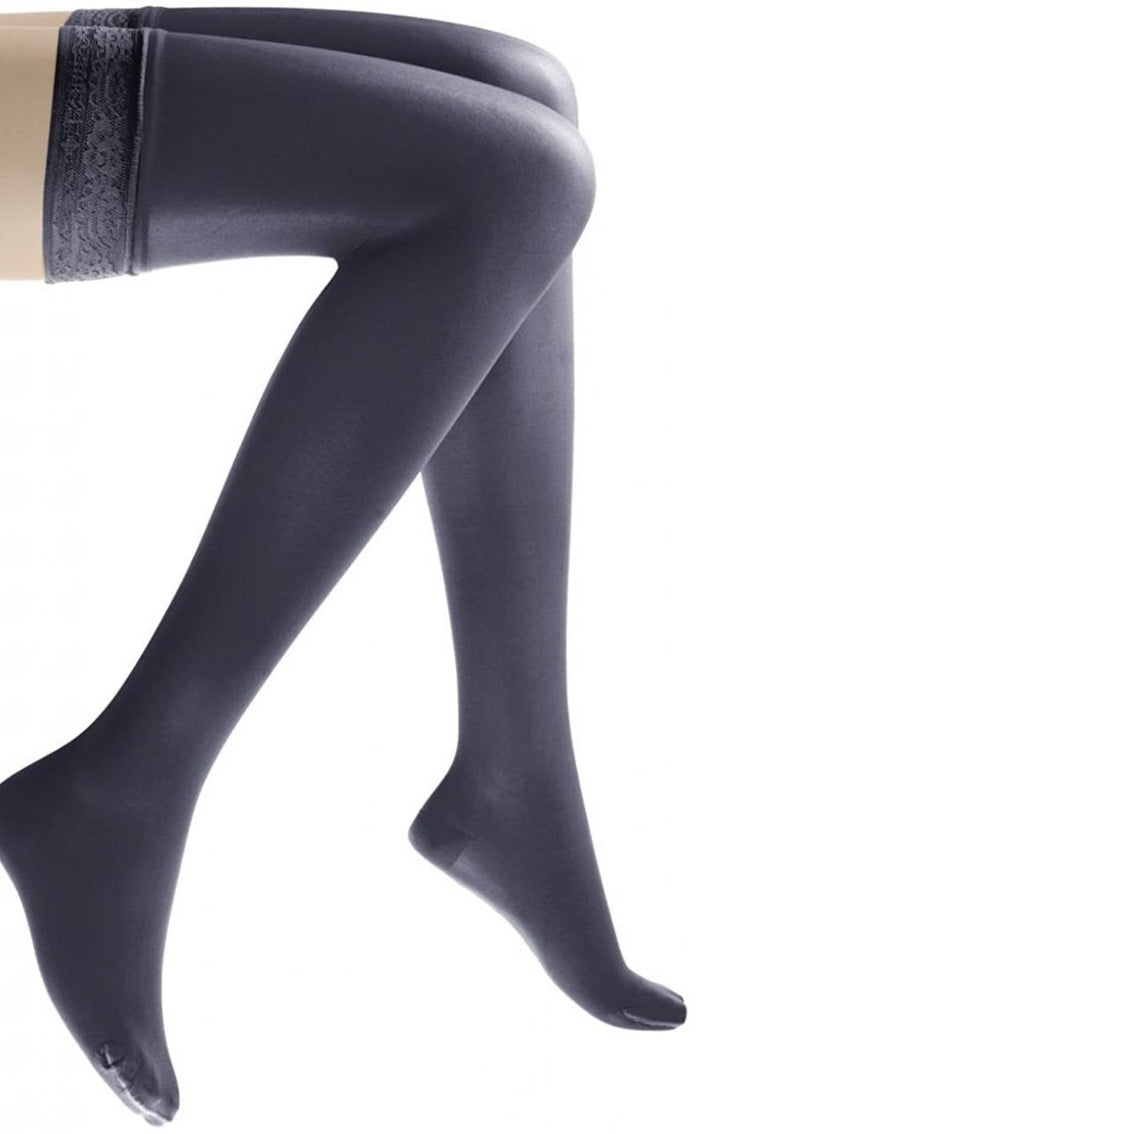 BSN MEDICAL JOBST® ULTRASHEER COMPRESSION STOCKINGS. STOCKING COMP